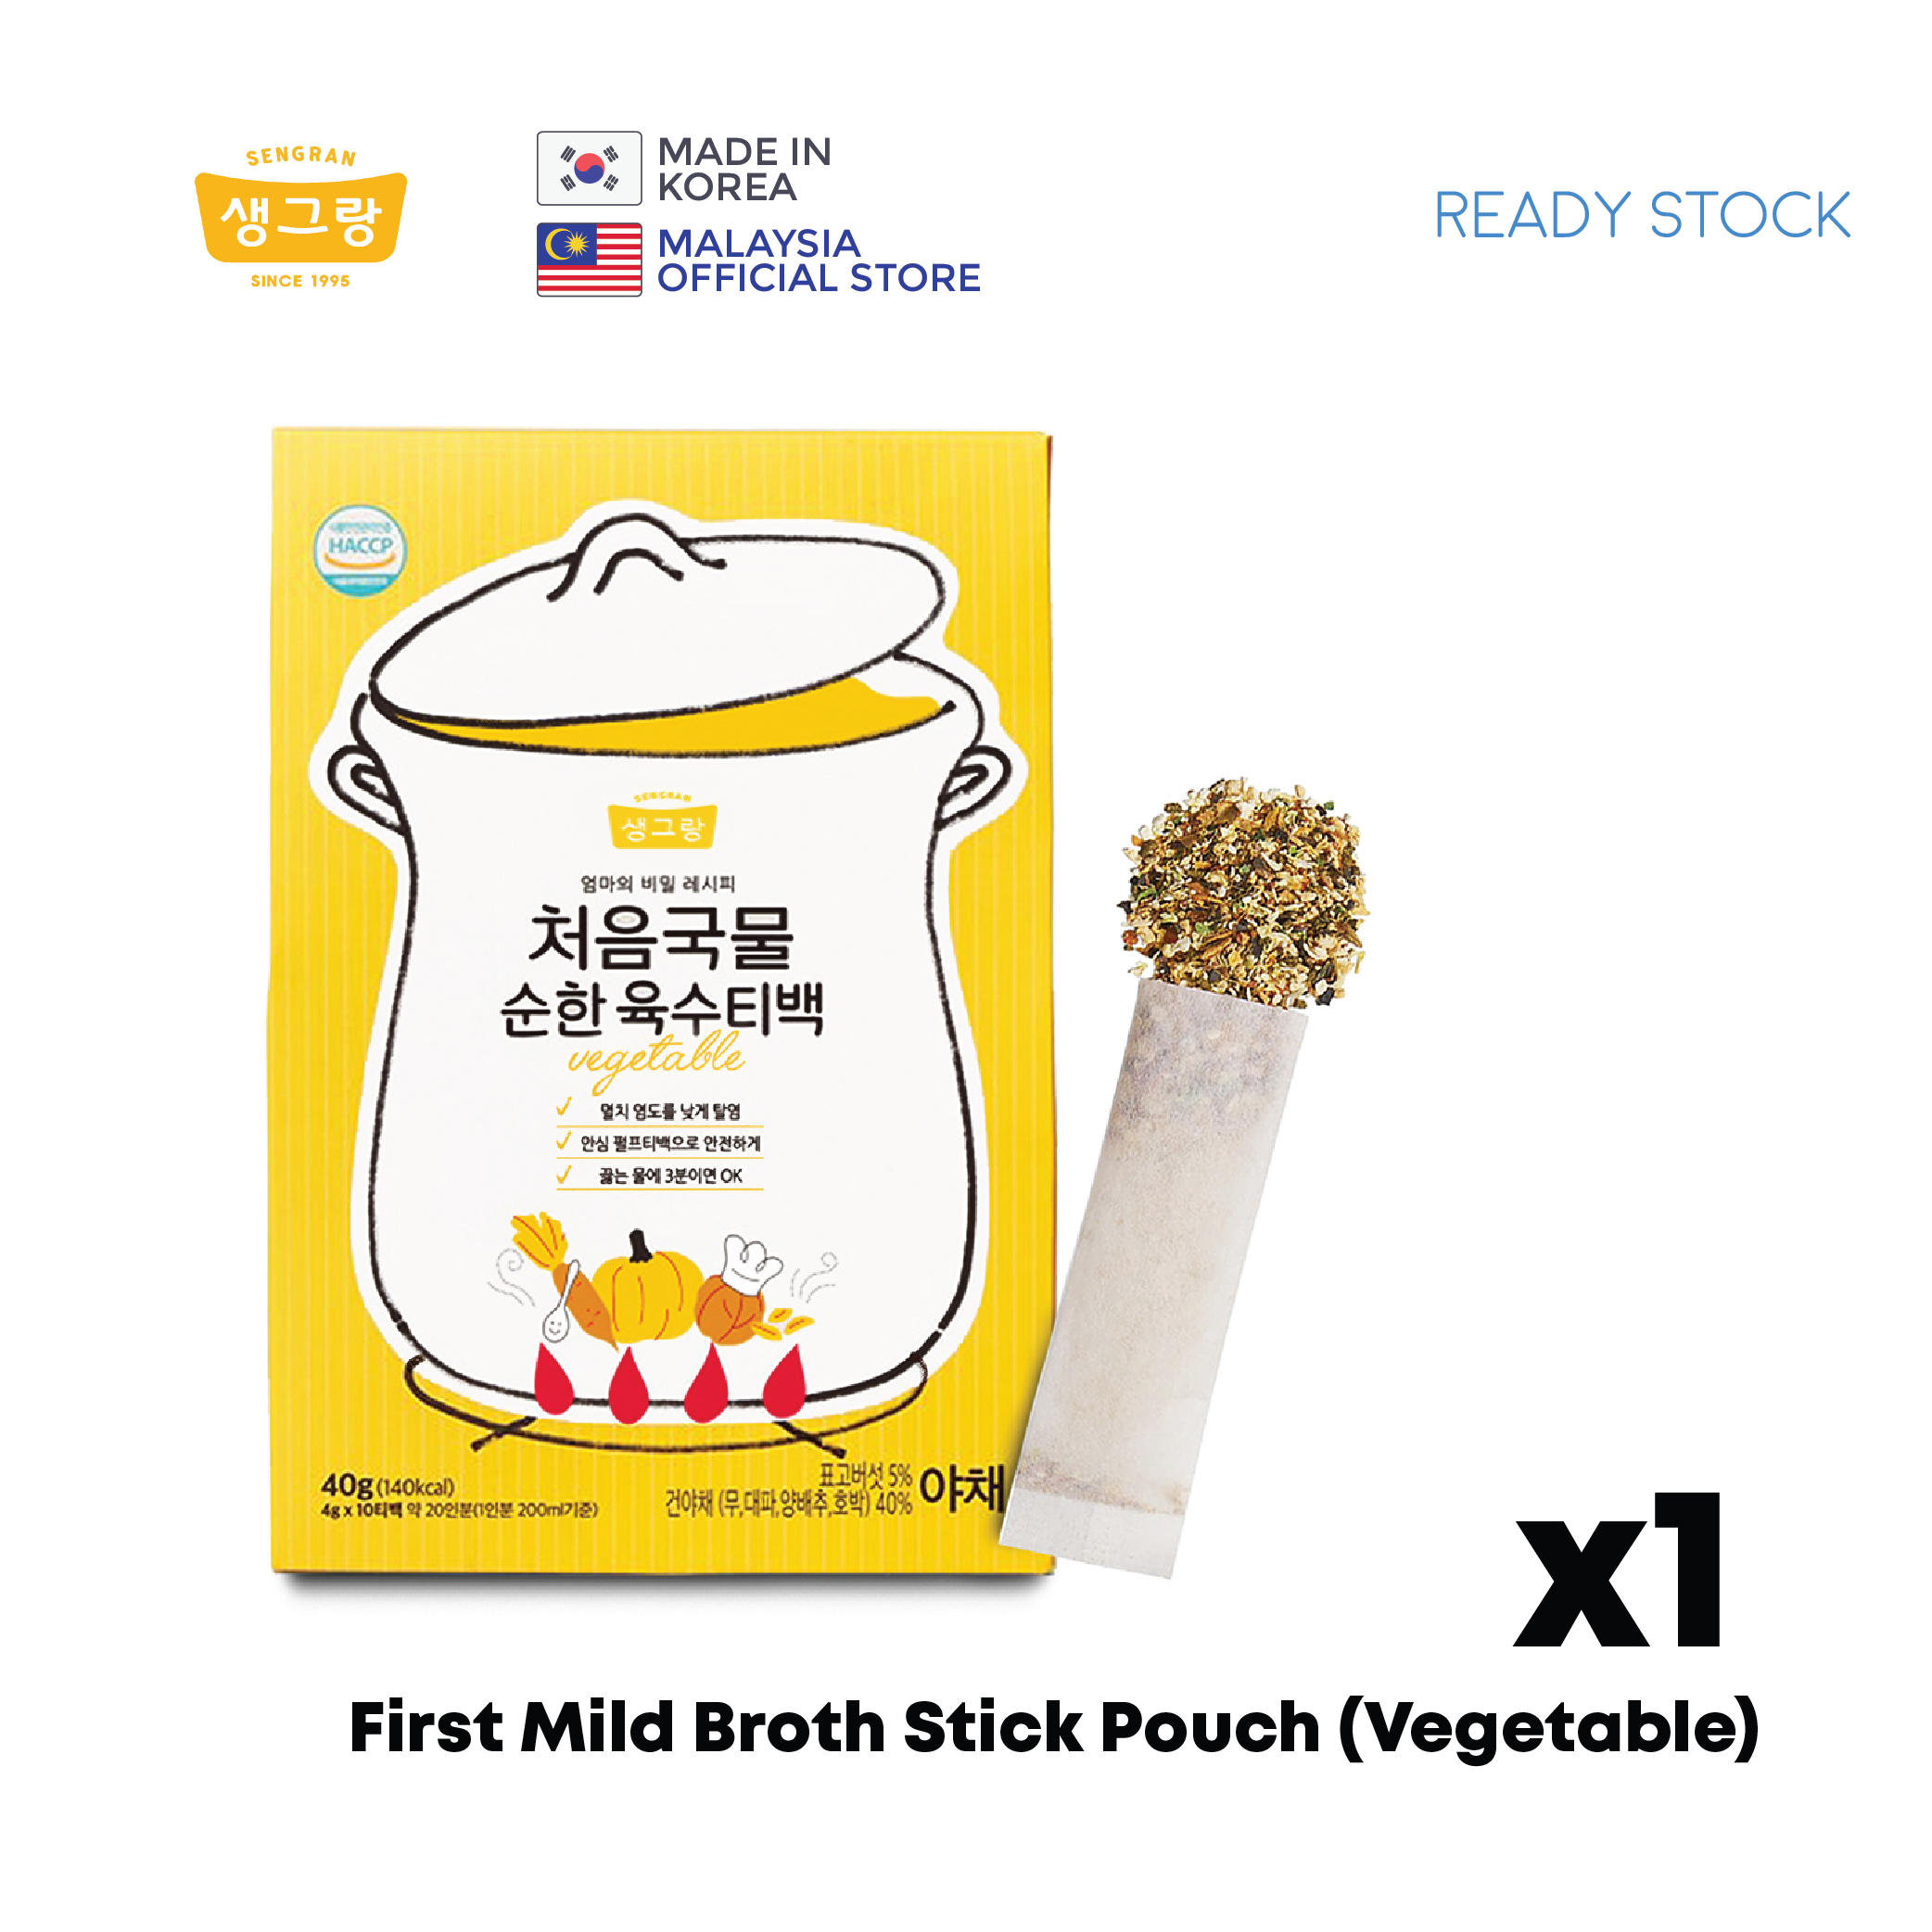 [Woorichan] 2in1 First Mild Broth Soup Pouch - Vegetables & Seafood (EXP 20224/7)